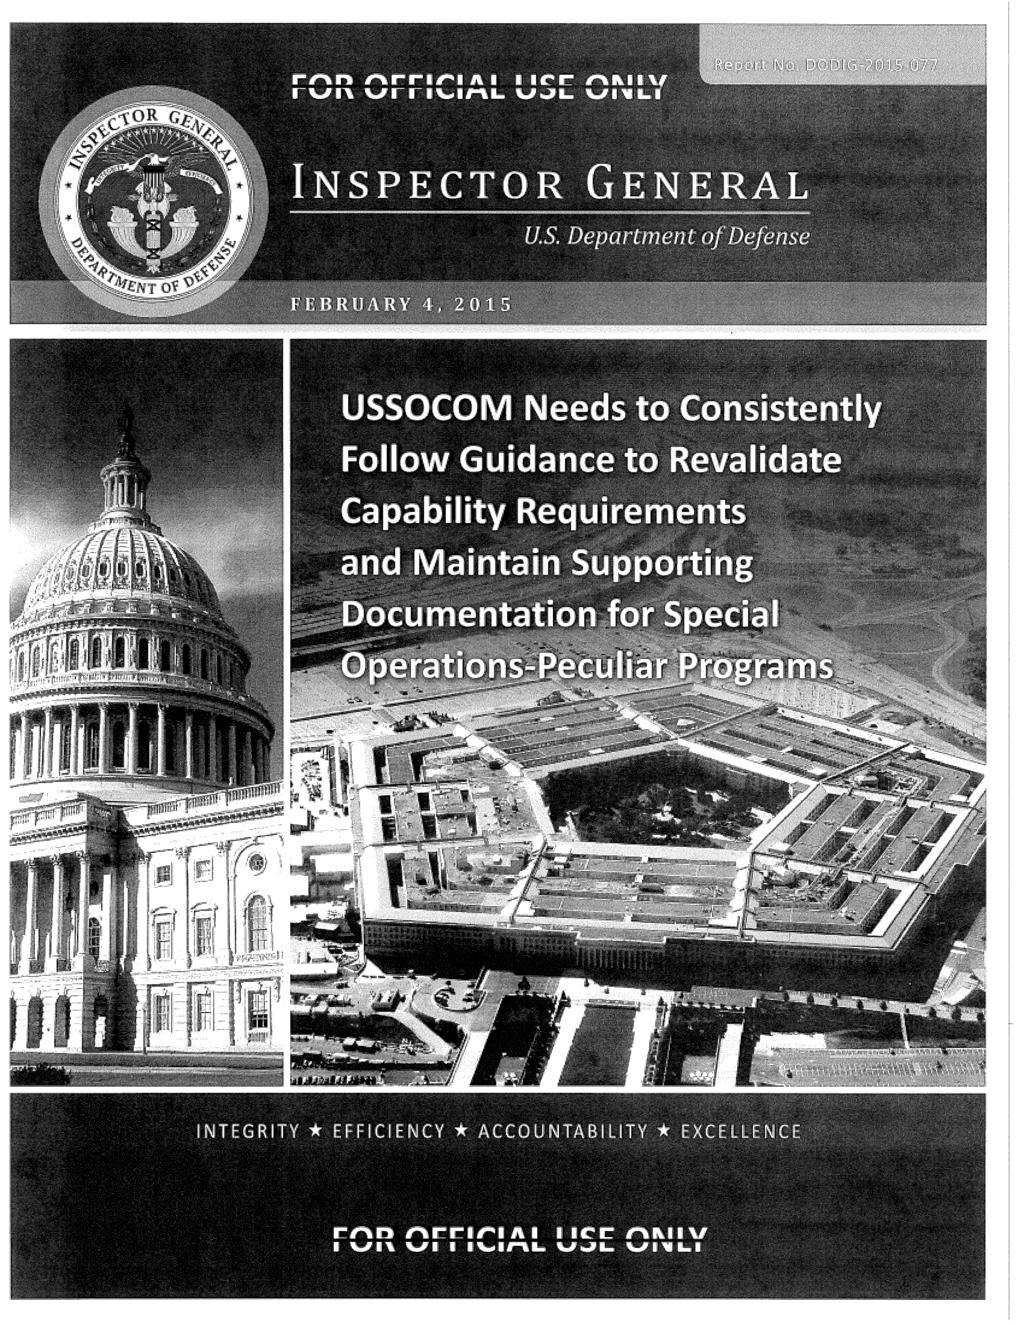 USSOCOM Needs to Consistently Follow Guidance to Revalidate Capability